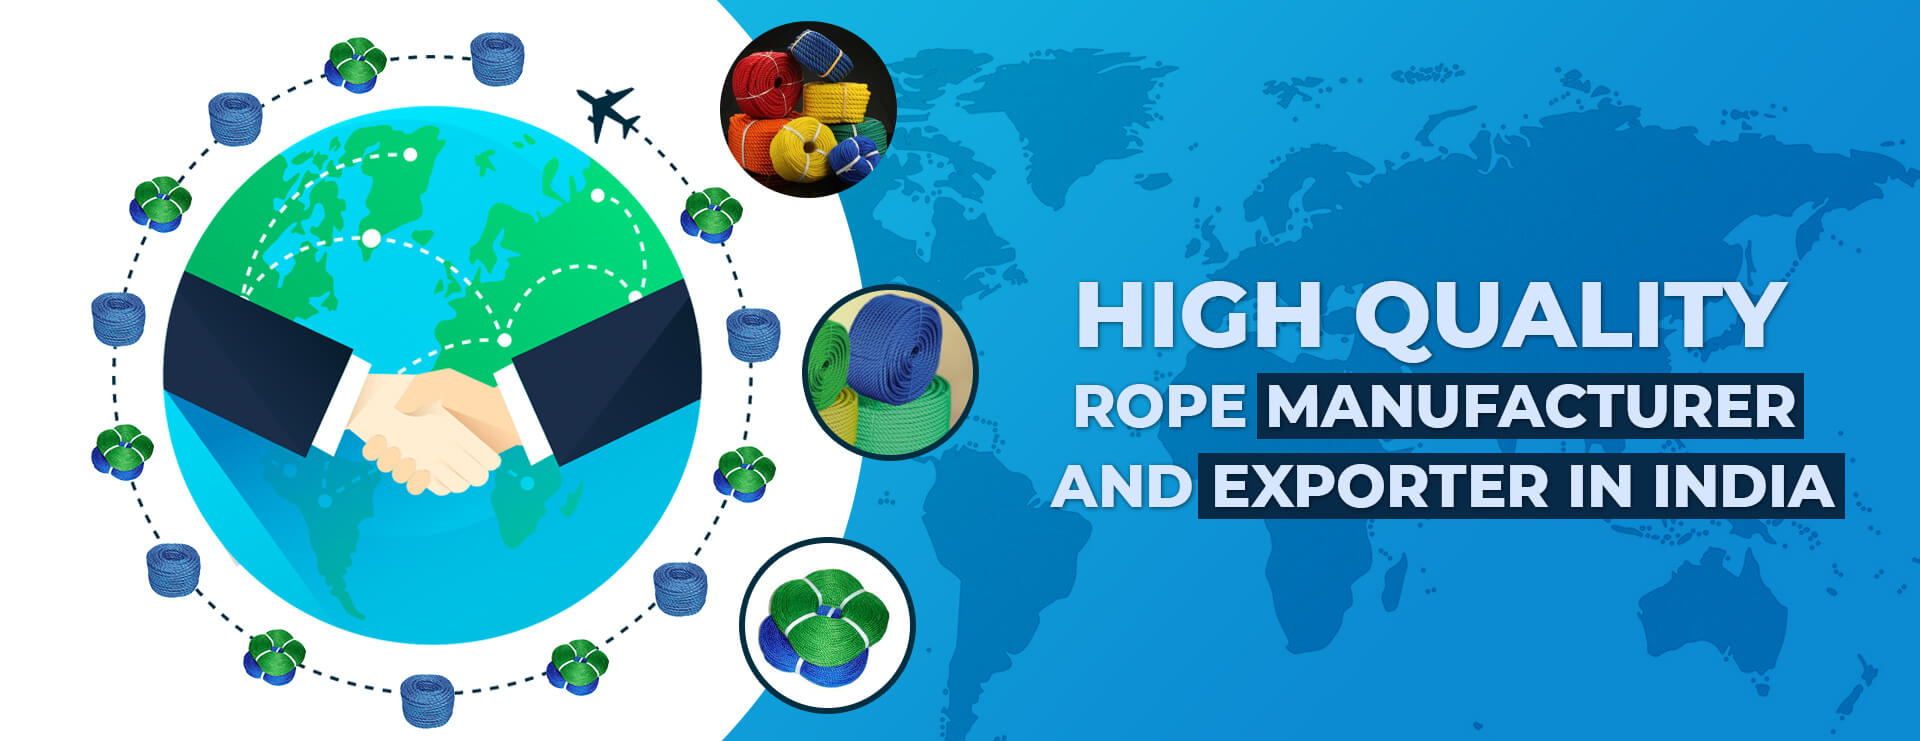 Rope Exporter India-banner